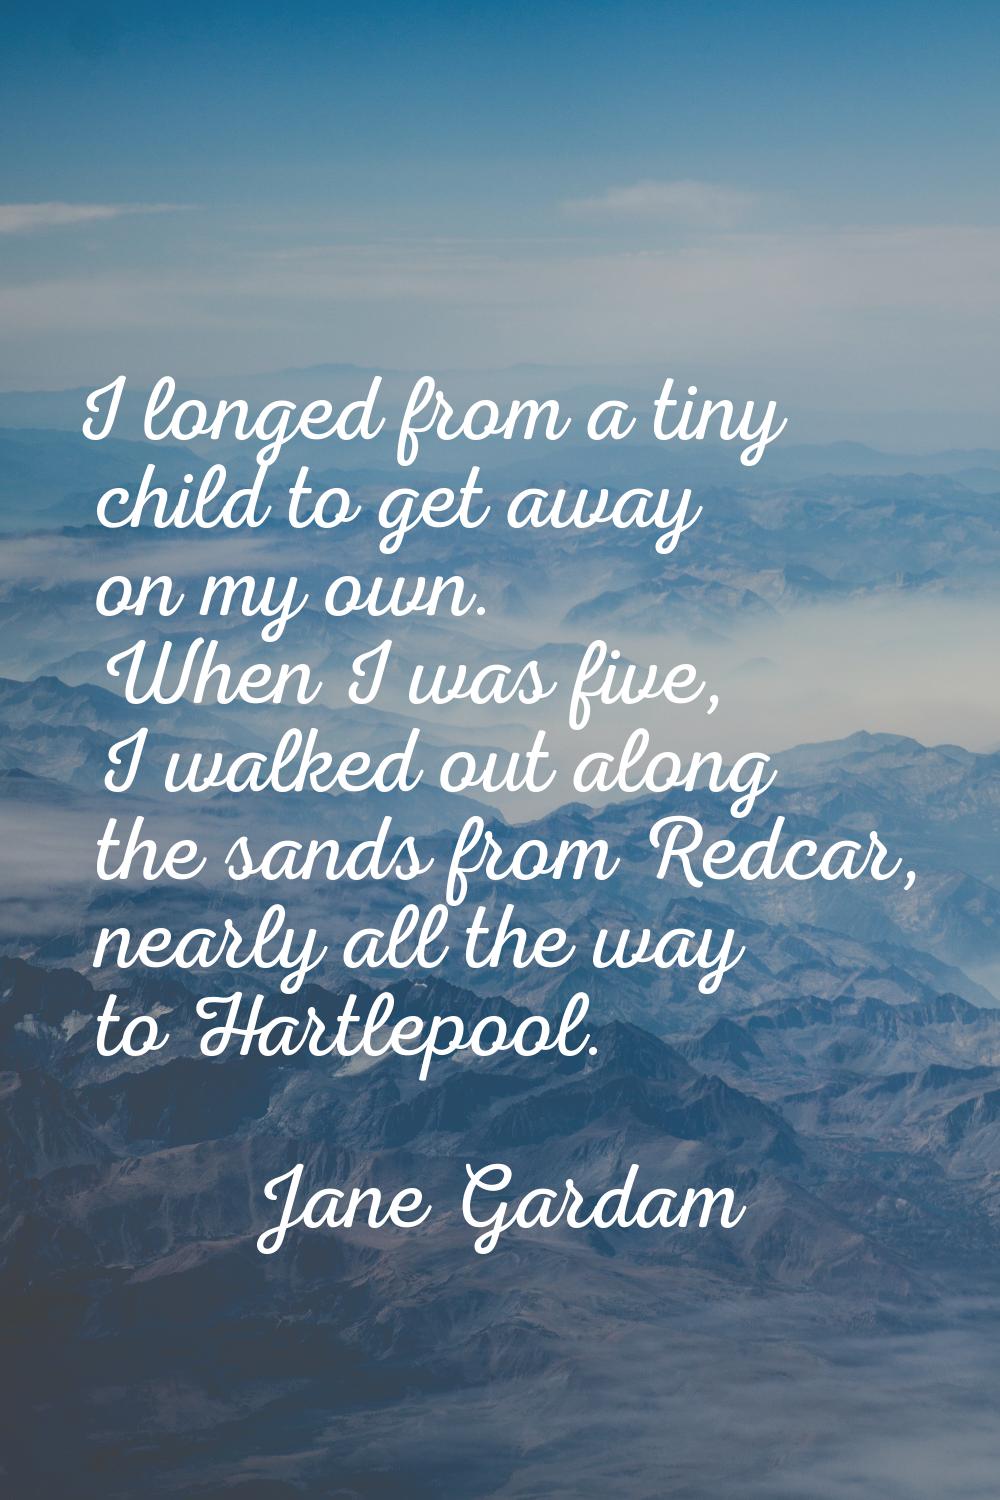 I longed from a tiny child to get away on my own. When I was five, I walked out along the sands fro